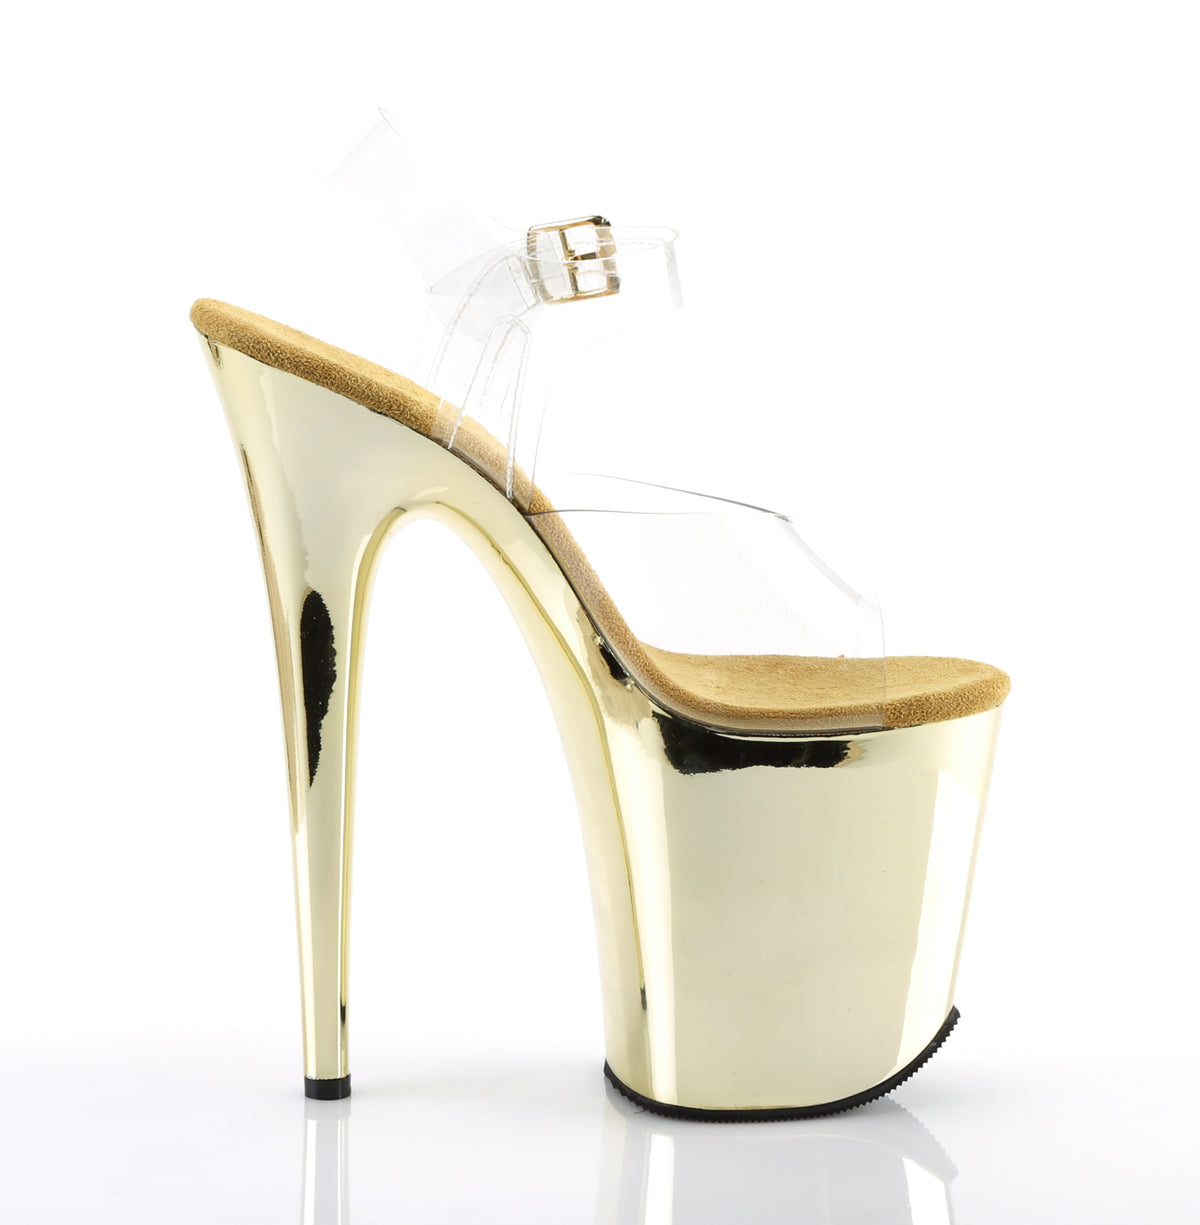 FLAMINGO-808 8" Clear and Gold Chrome Pole Dancer Platforms-Pleaser- Sexy Shoes Fetish Heels